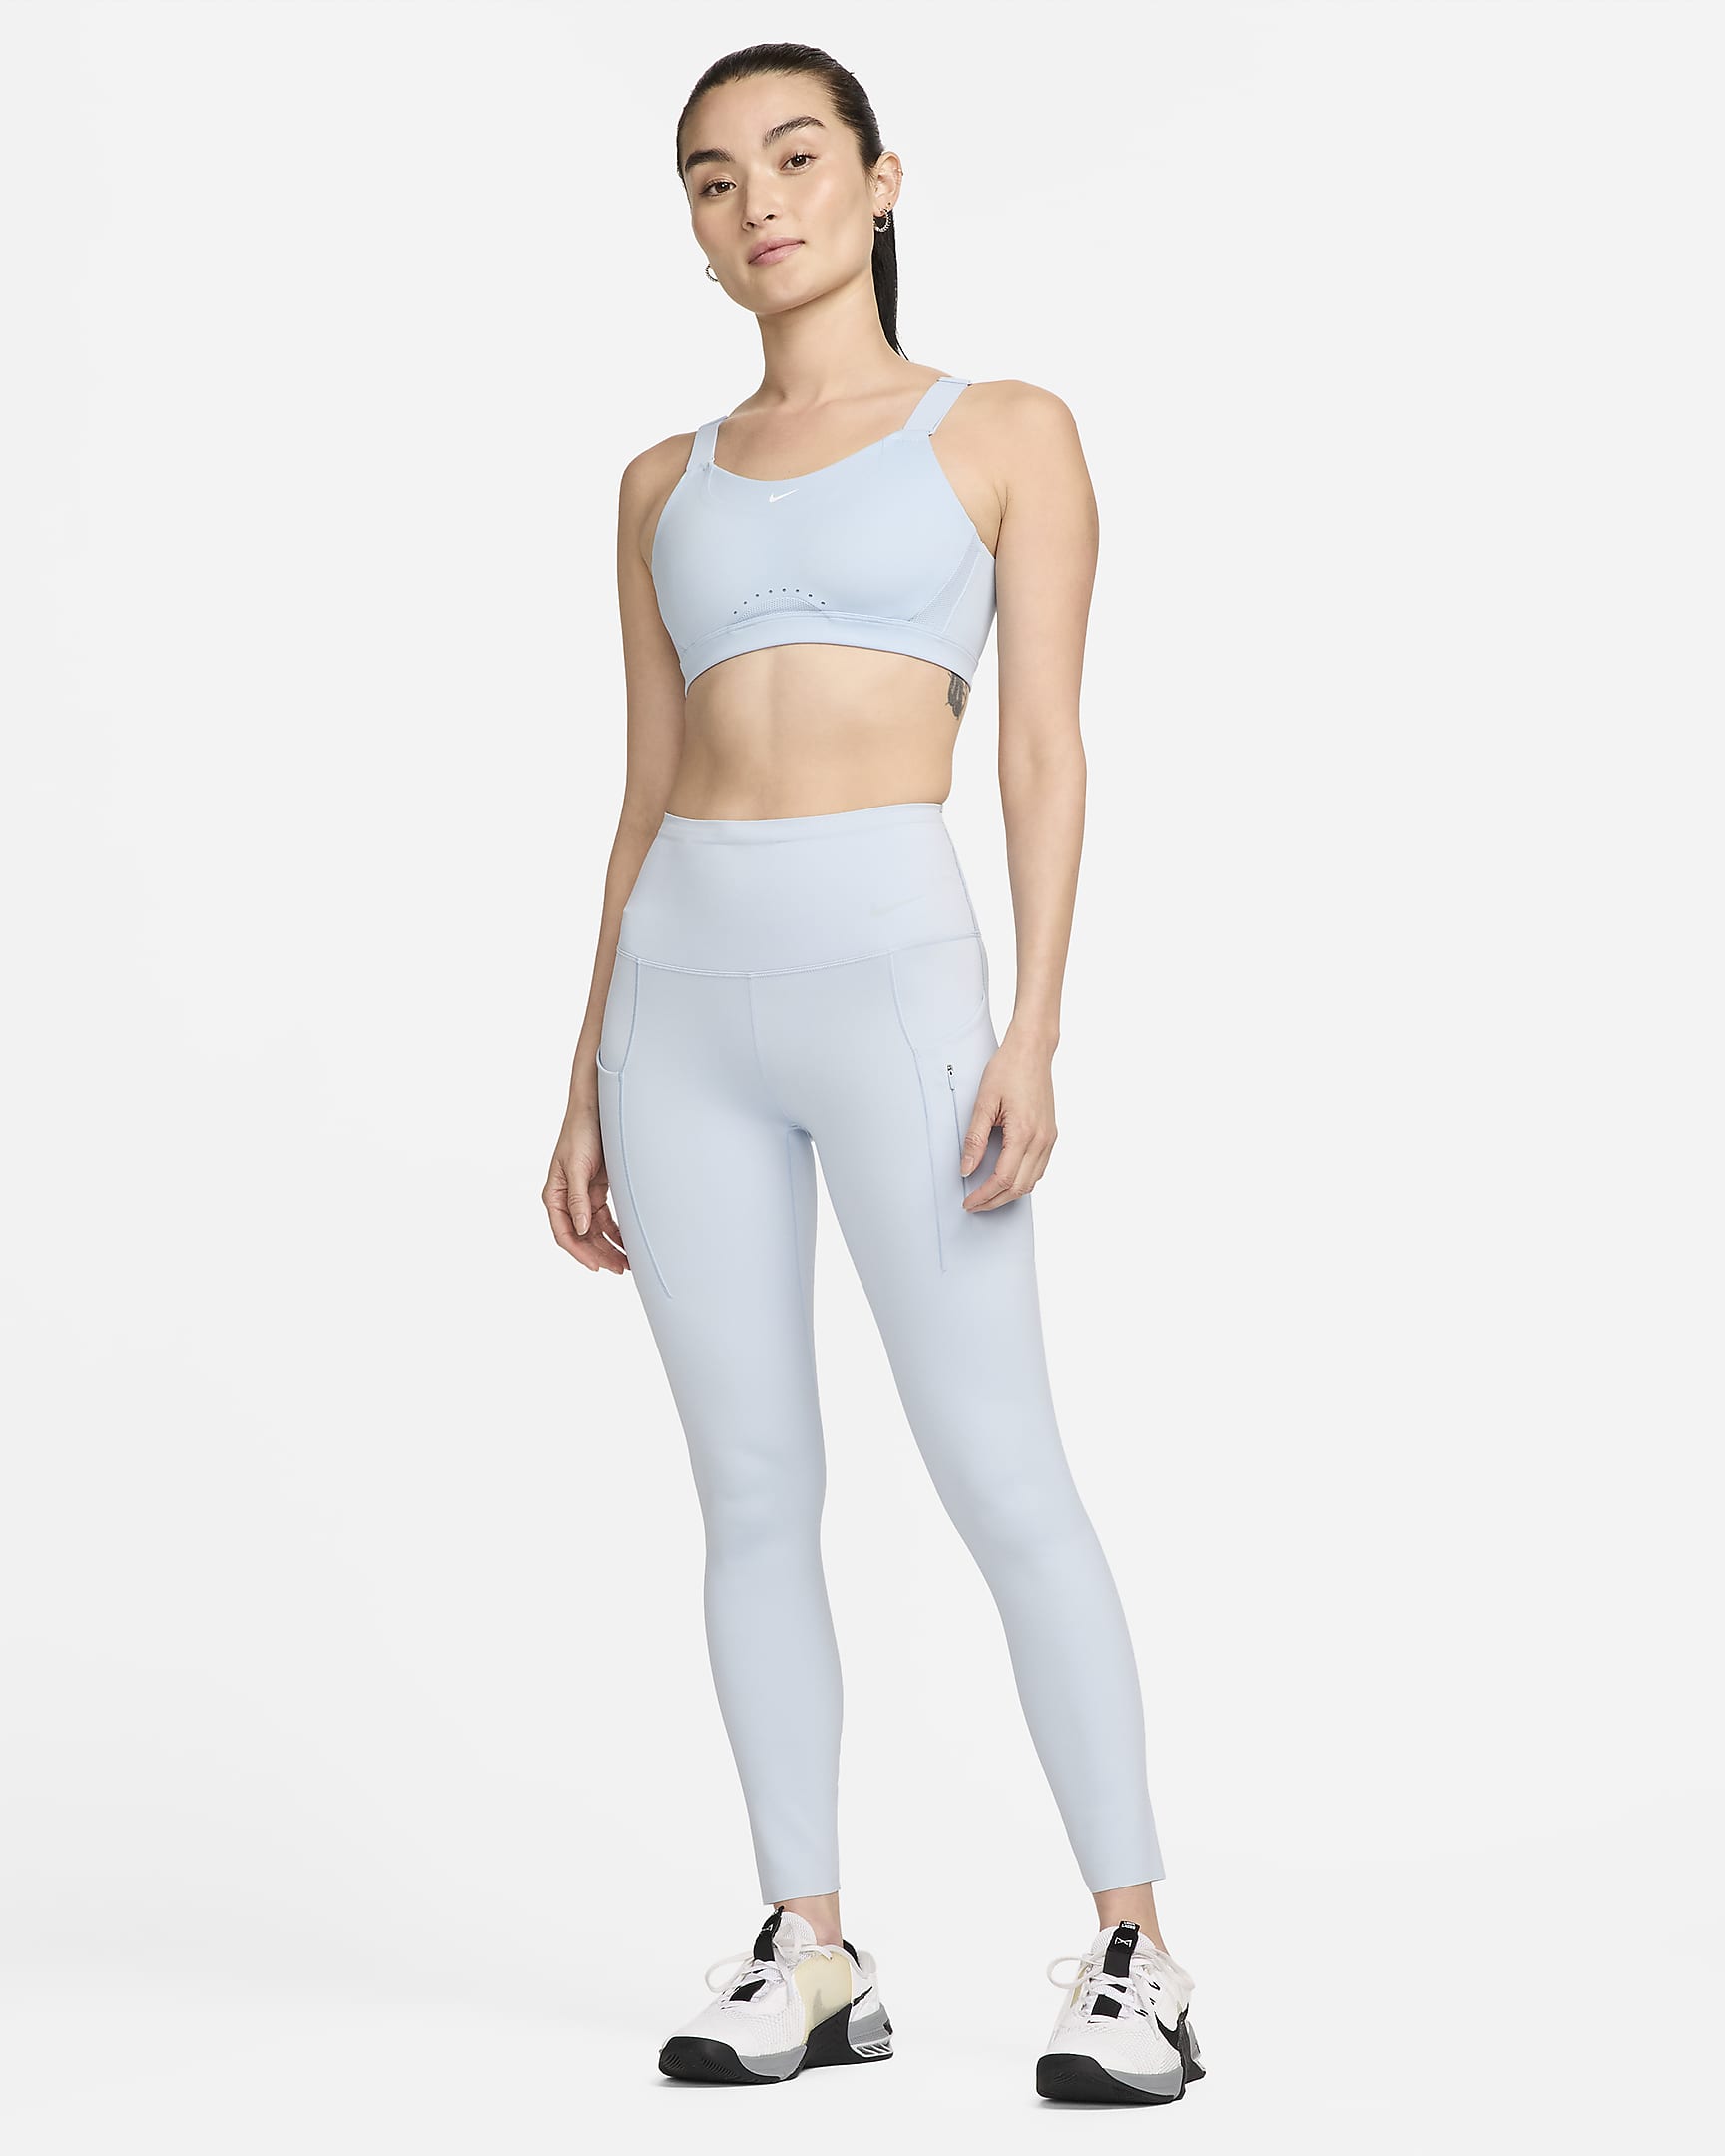 Nike Alpha Women's High-Support Padded Sports Bra - Light Armoury Blue/White